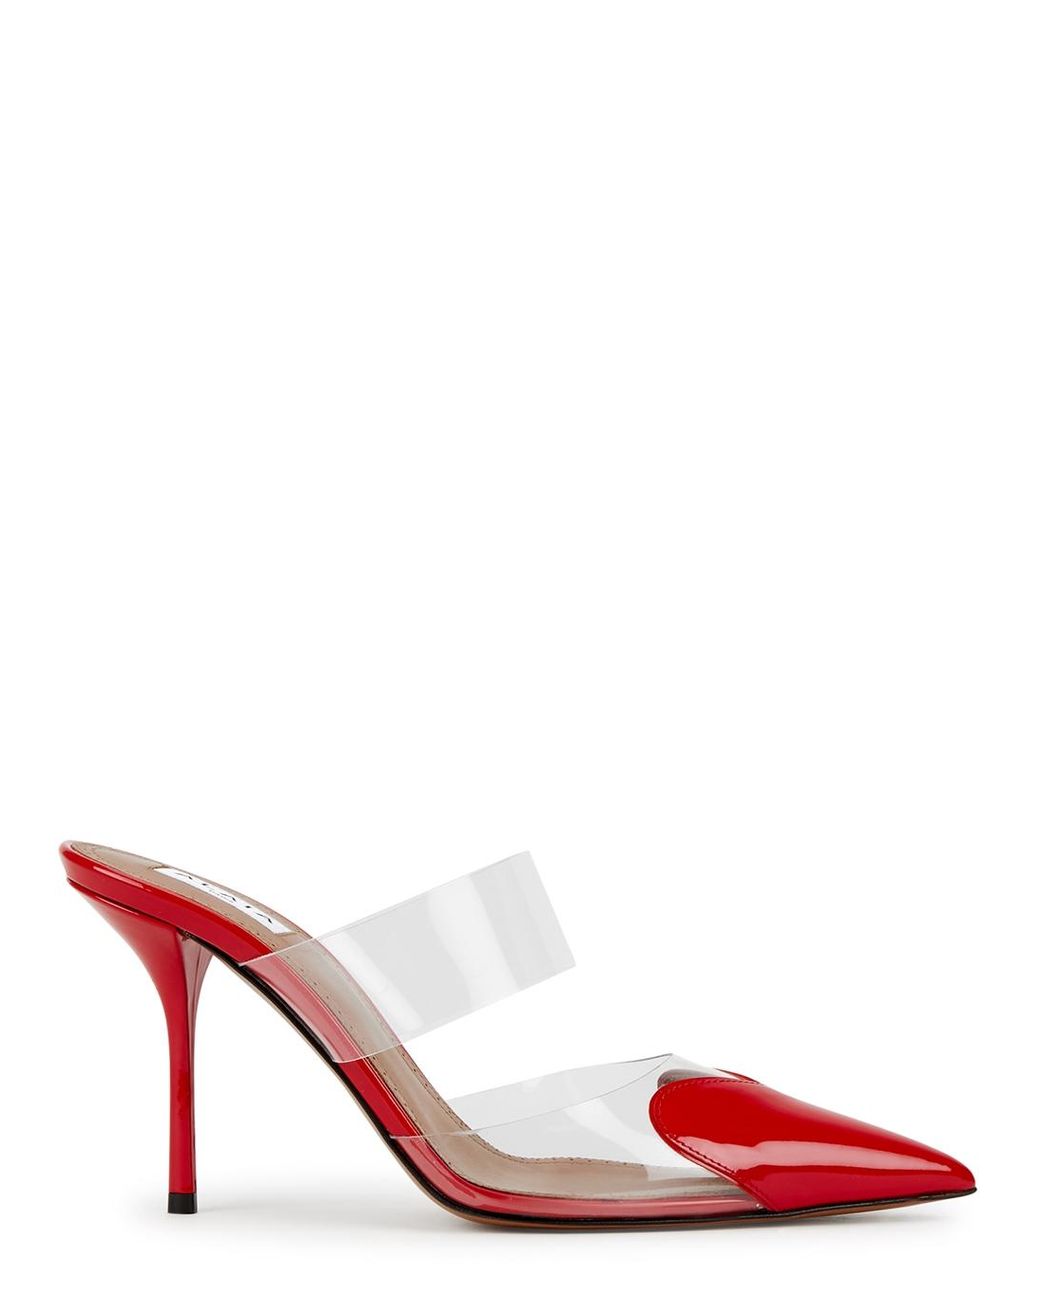 Alaïa Coeur 90 Patent Leather Mules in Red | Lyst